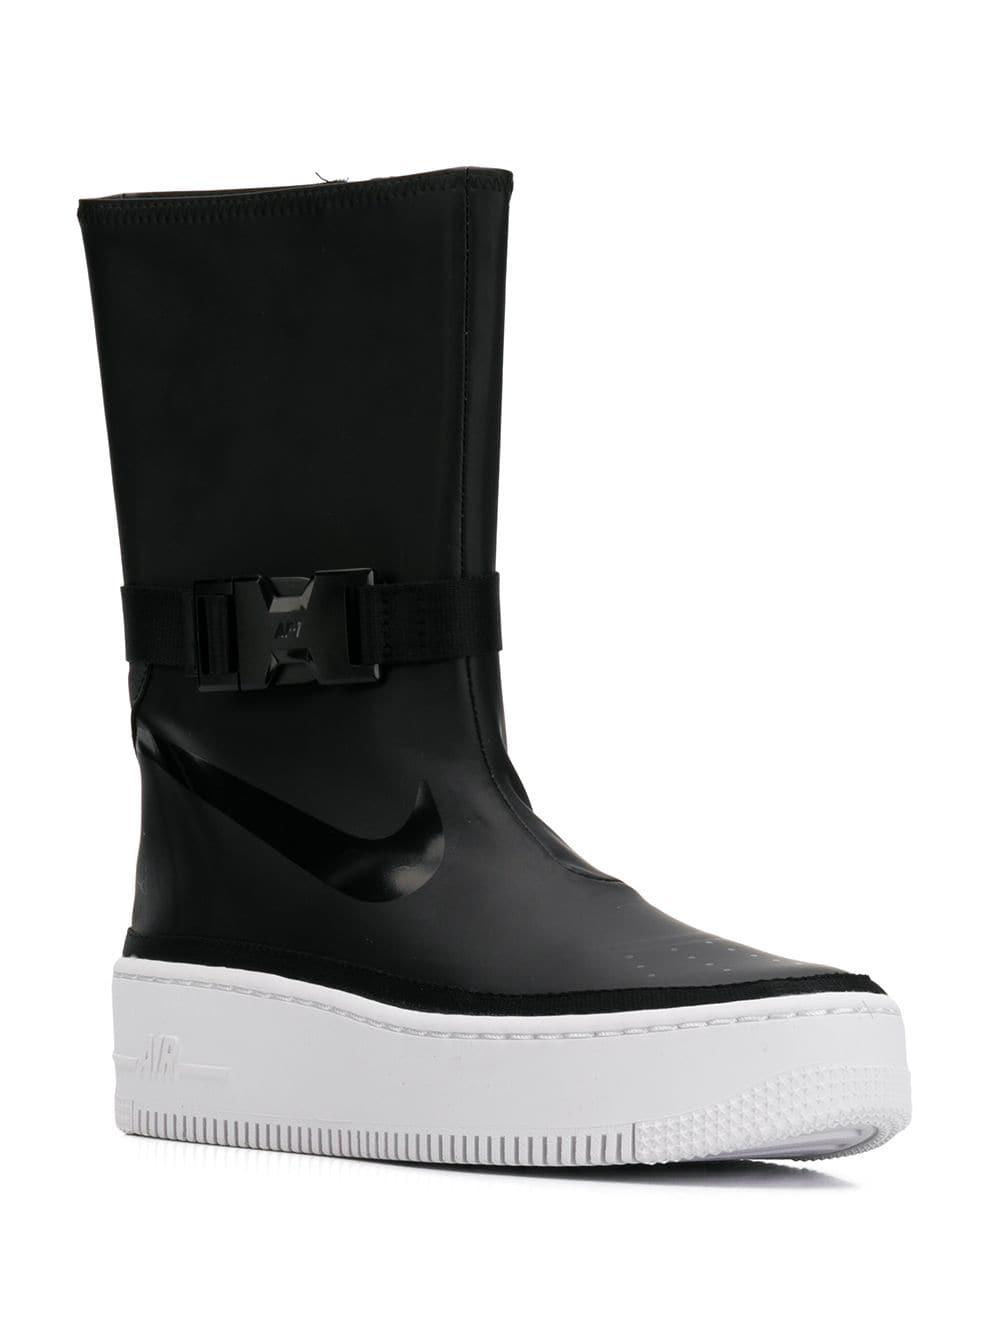 Nike Air Force 1 Sage High Sneakers in Black | Lyst Canada